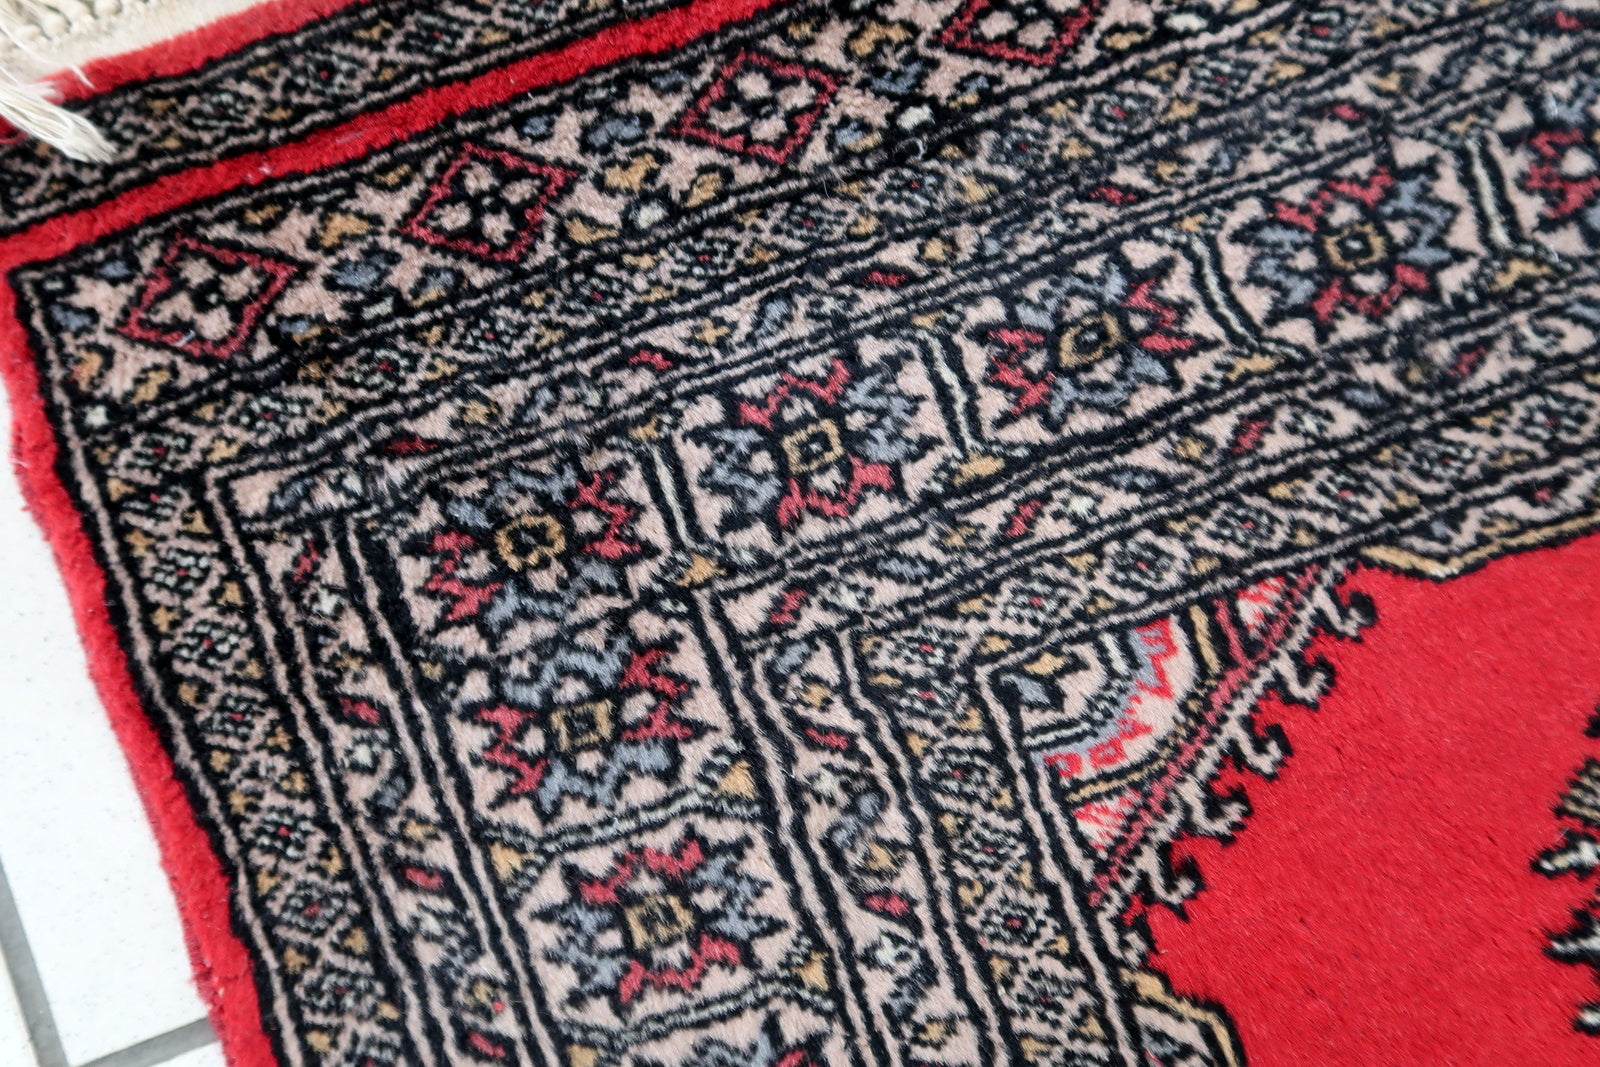 Handmade vintage Uzbek Bukhara rug in red color. The rug has been made in wool in the end of 20th century. It is in original condition, it has some signs of age.